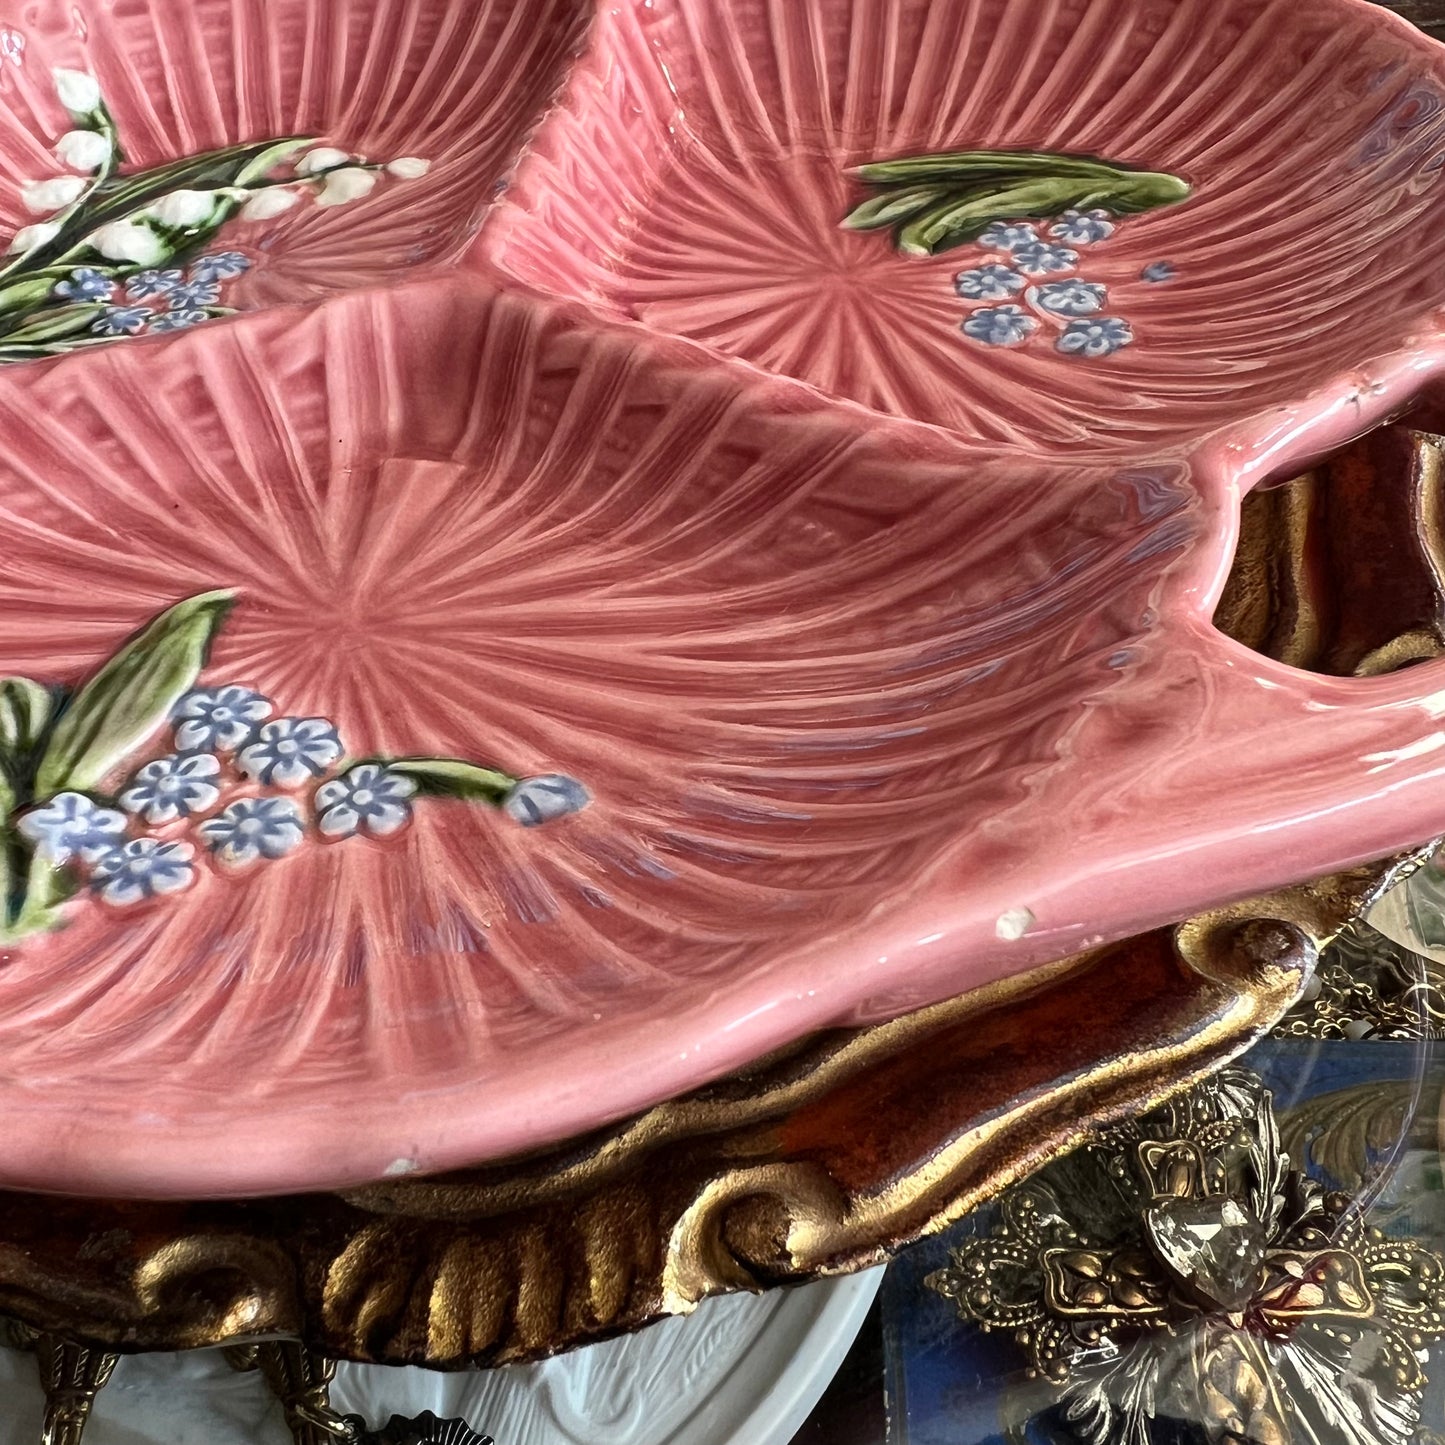 Vintage Pretty Pink Plate Lily of the Valley & Forget me Nots German Majolica Marie Louise Schramburg